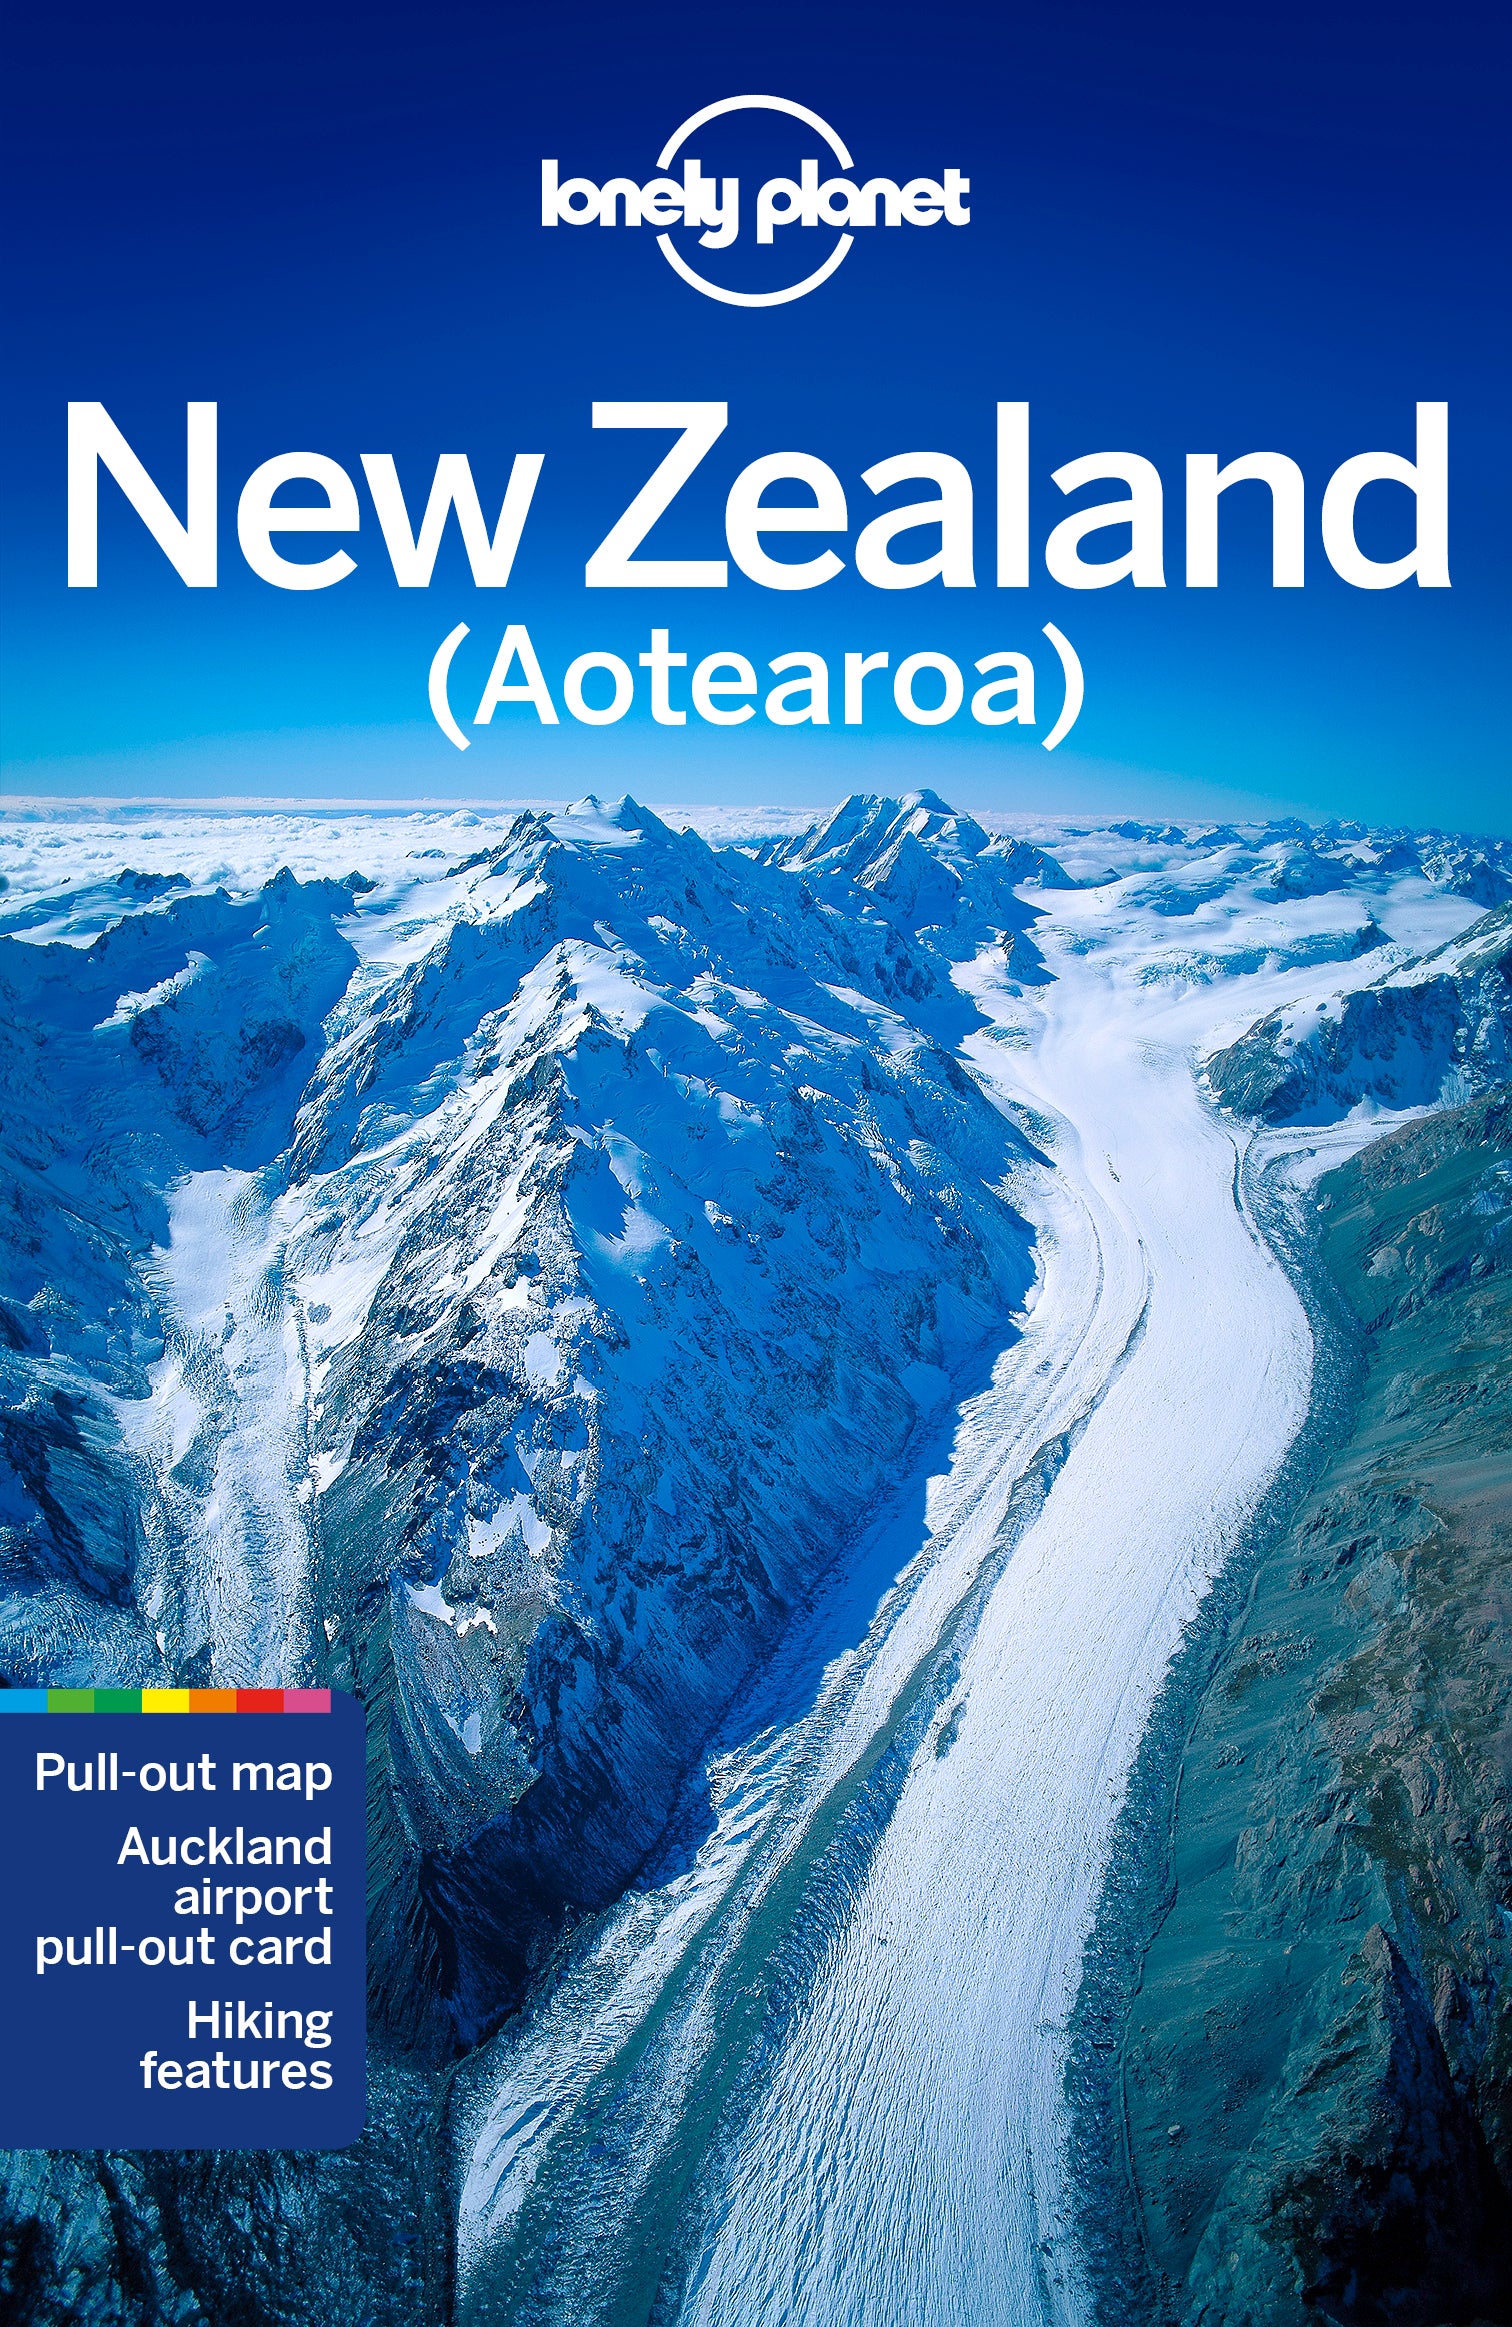 Atkinson,　Planet　Zealand　Peter　Perrin,　Paper　by　Dragicevich,　C　Plus　Lonely　Brett　Planet,　Bain,　Andrew　Monique　Lonely　New